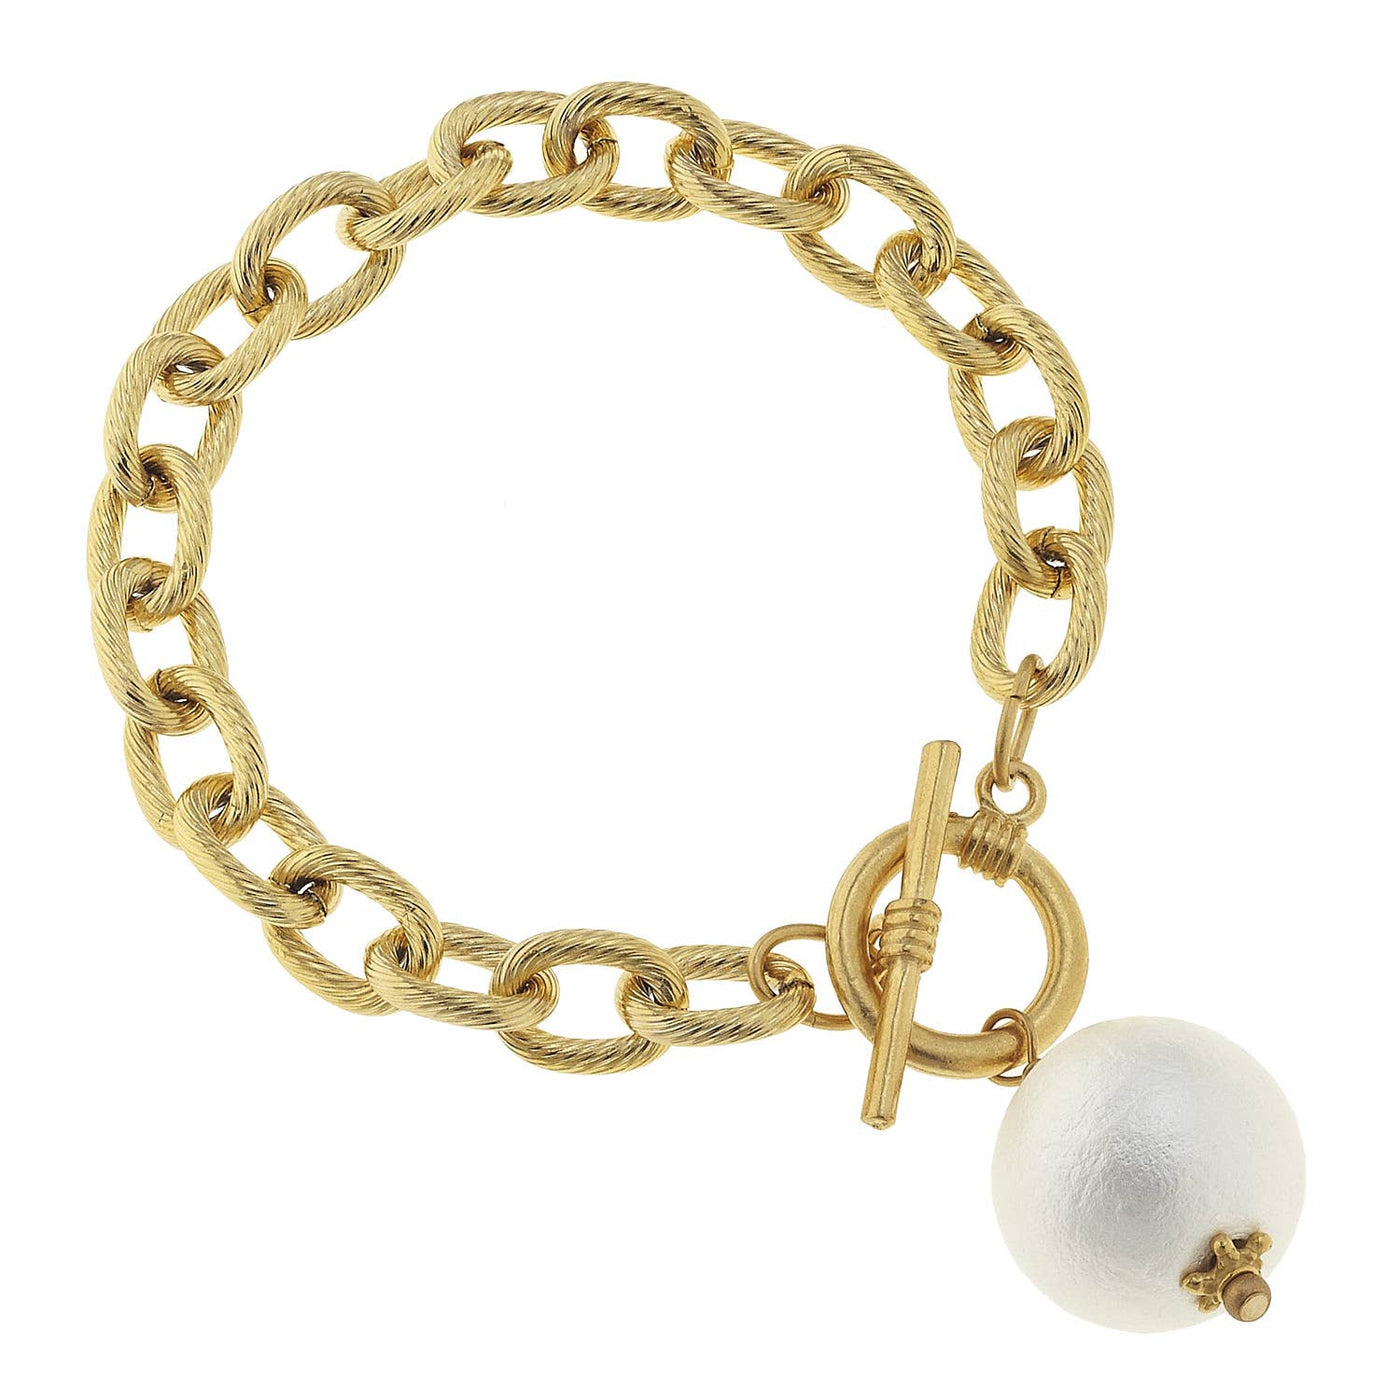 Susan Shaw - Gold and White Cotton Pearl Toggle Bracelet